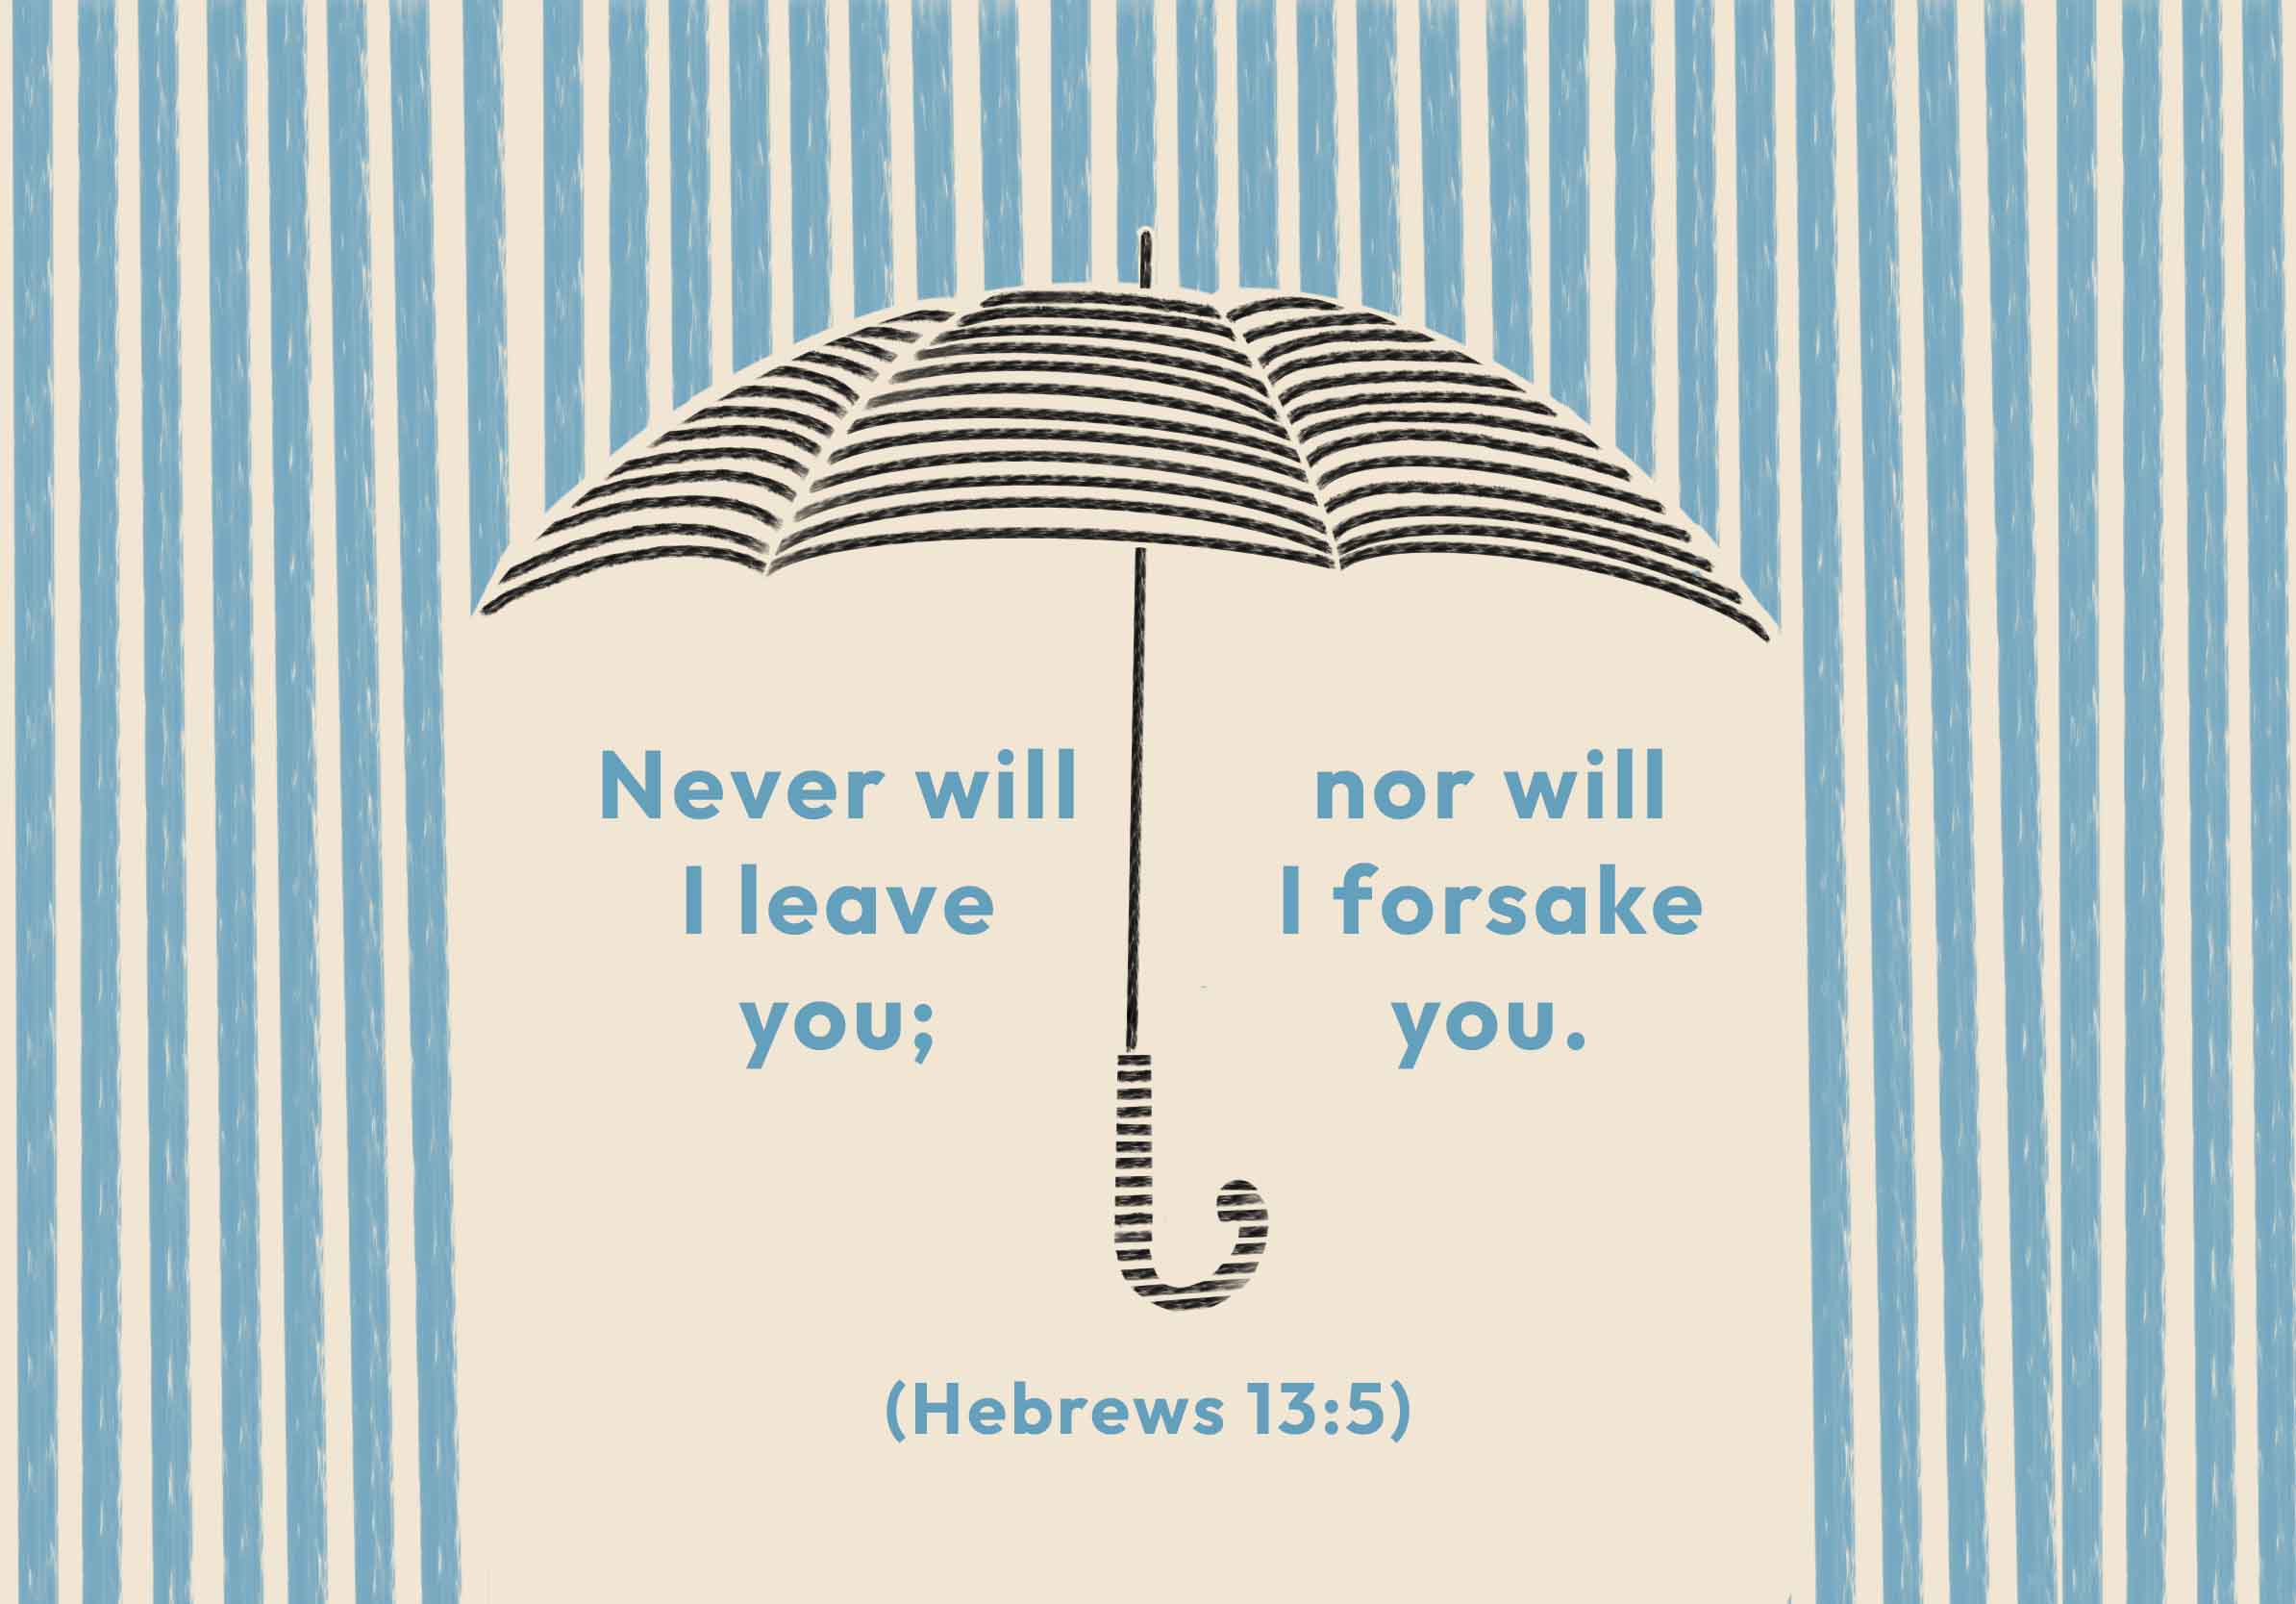 Never will I leave you, nor will I forsake you. (Hebrews 13:5)